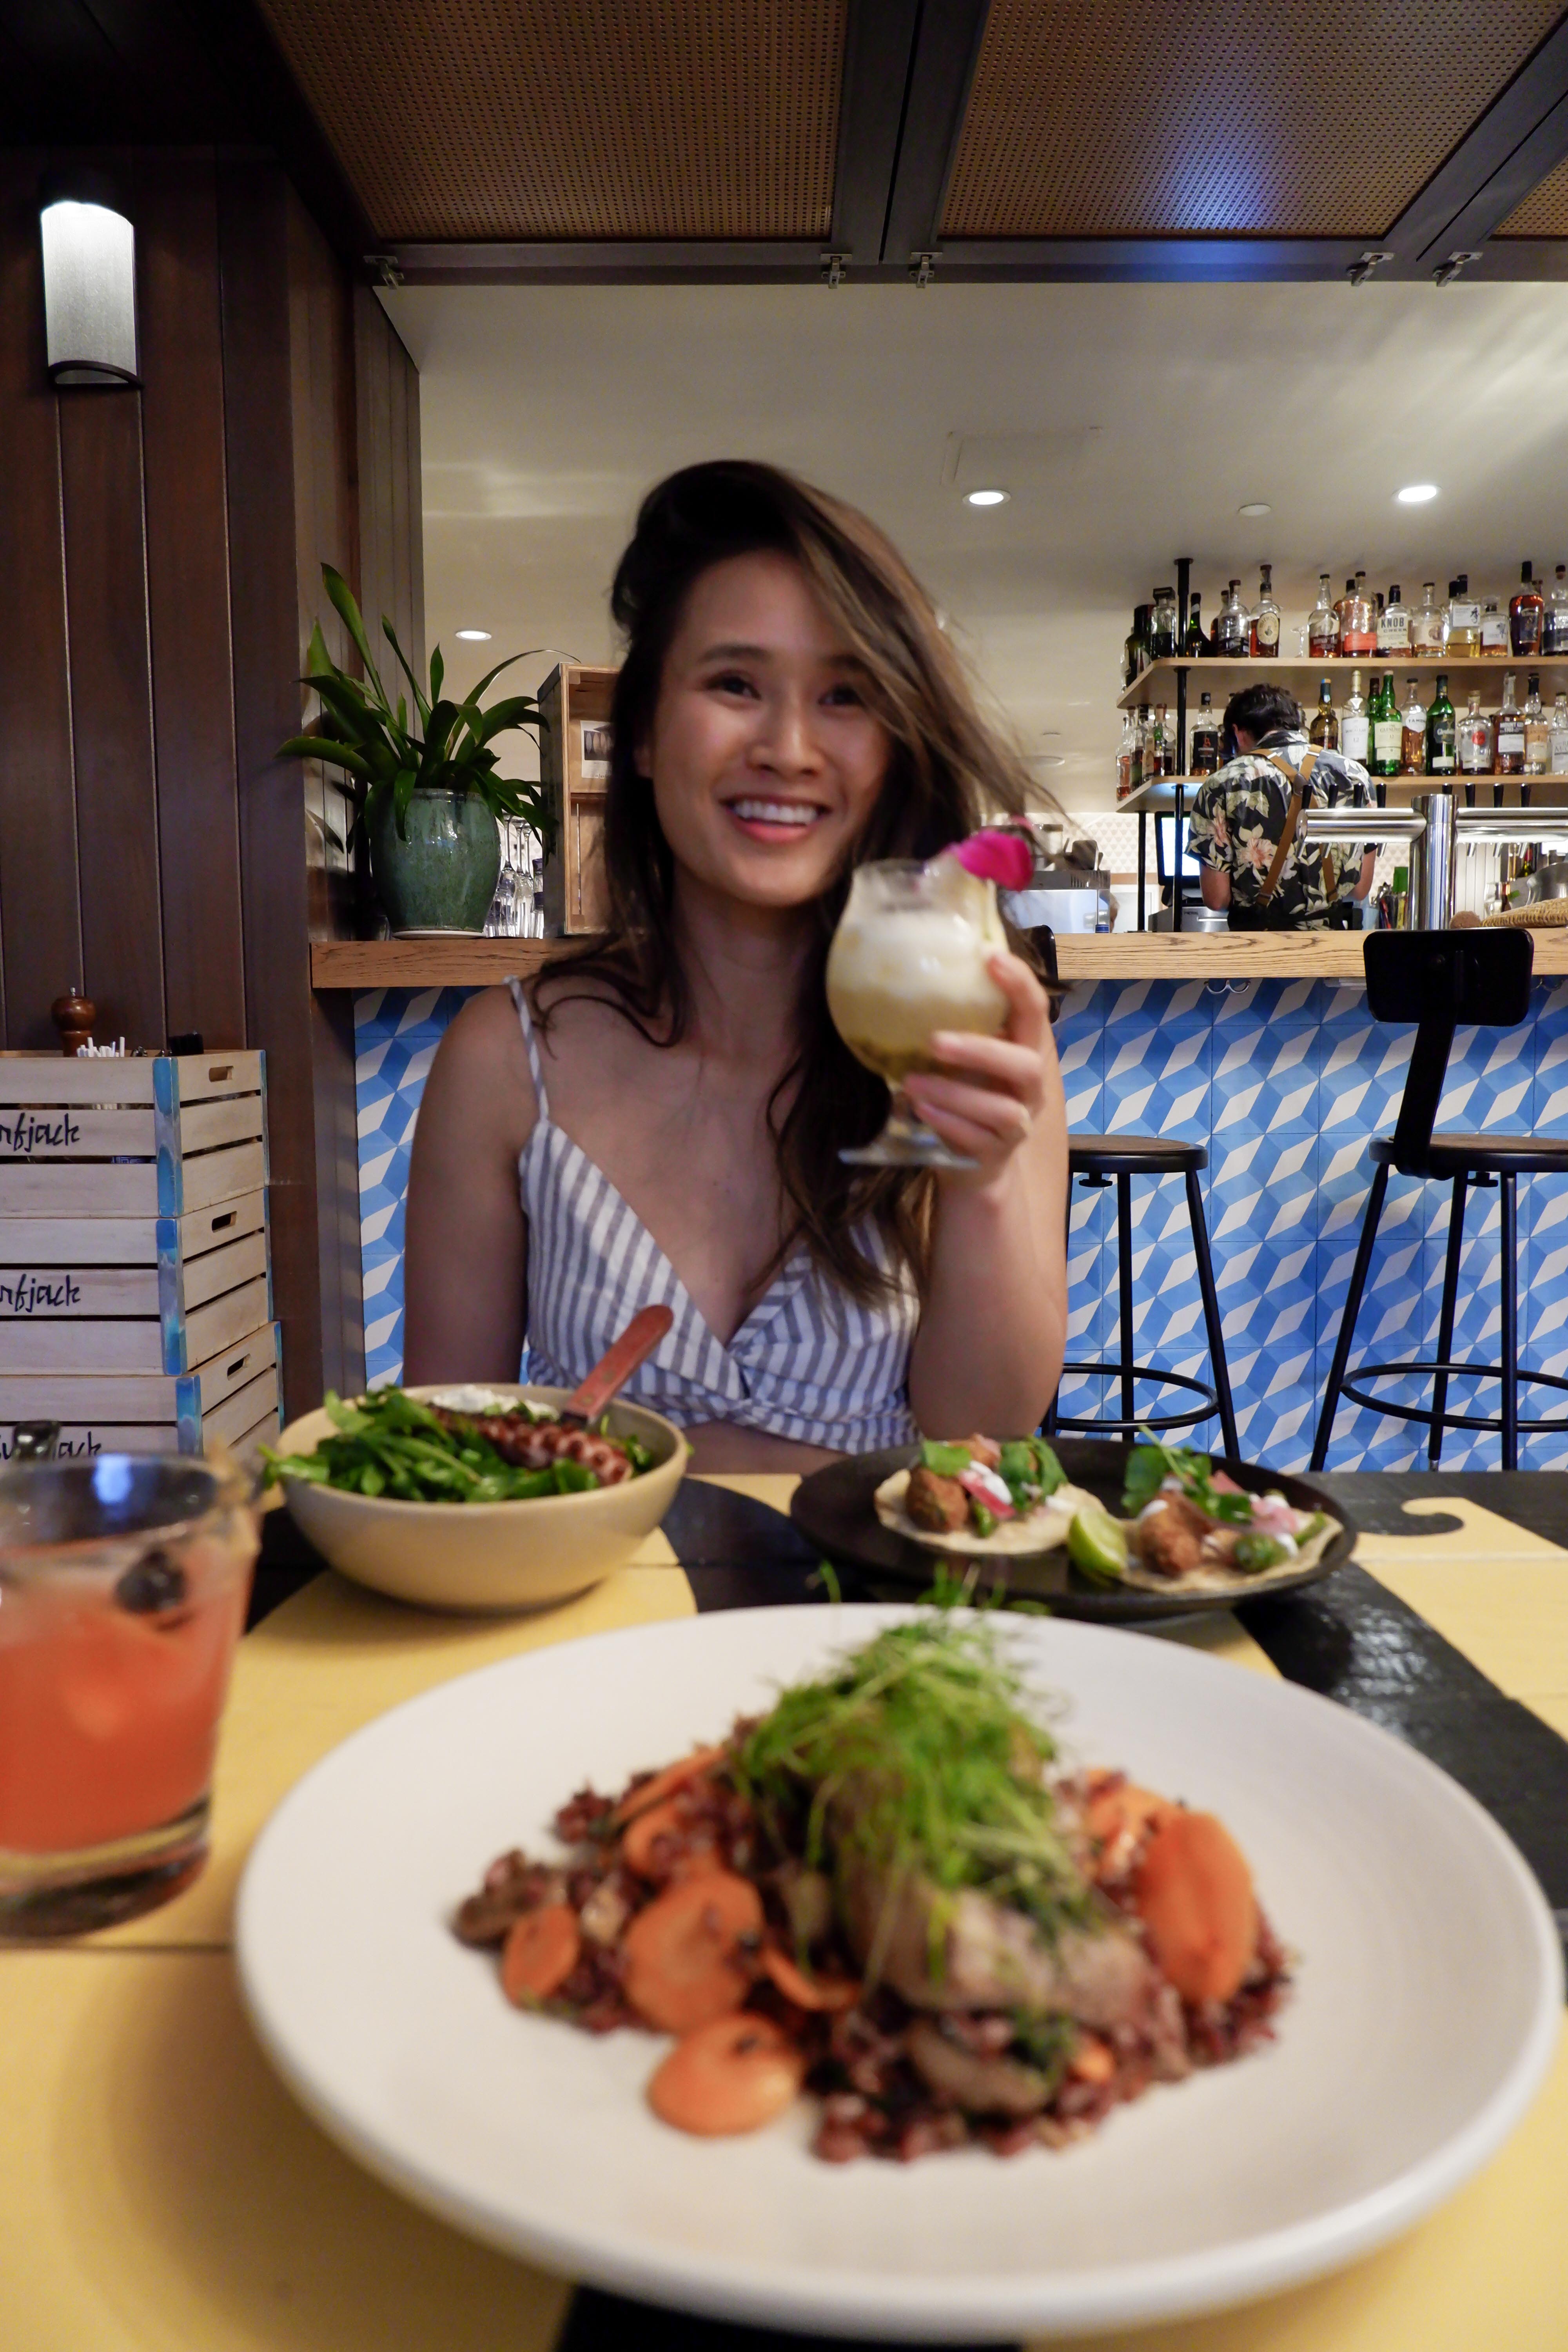 Places to Stay and eat in Oahu, Hawaii: The Surfjack Hotel - Mahina & Sun’s seafood restaurant #camandtay #camlee